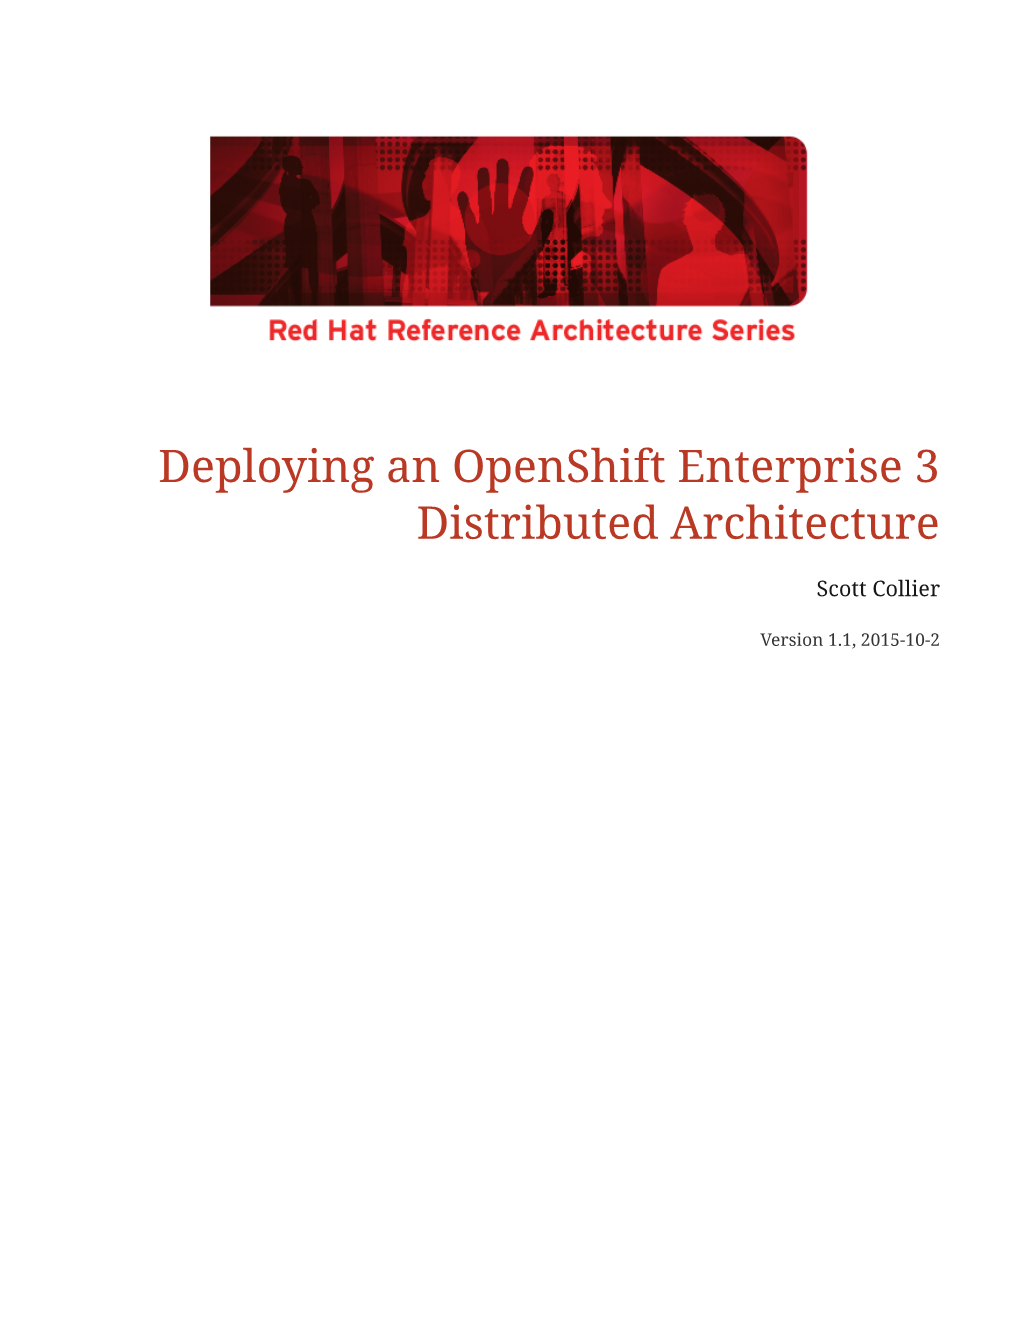 Deploying an Openshift Enterprise 3 Distributed Architecture